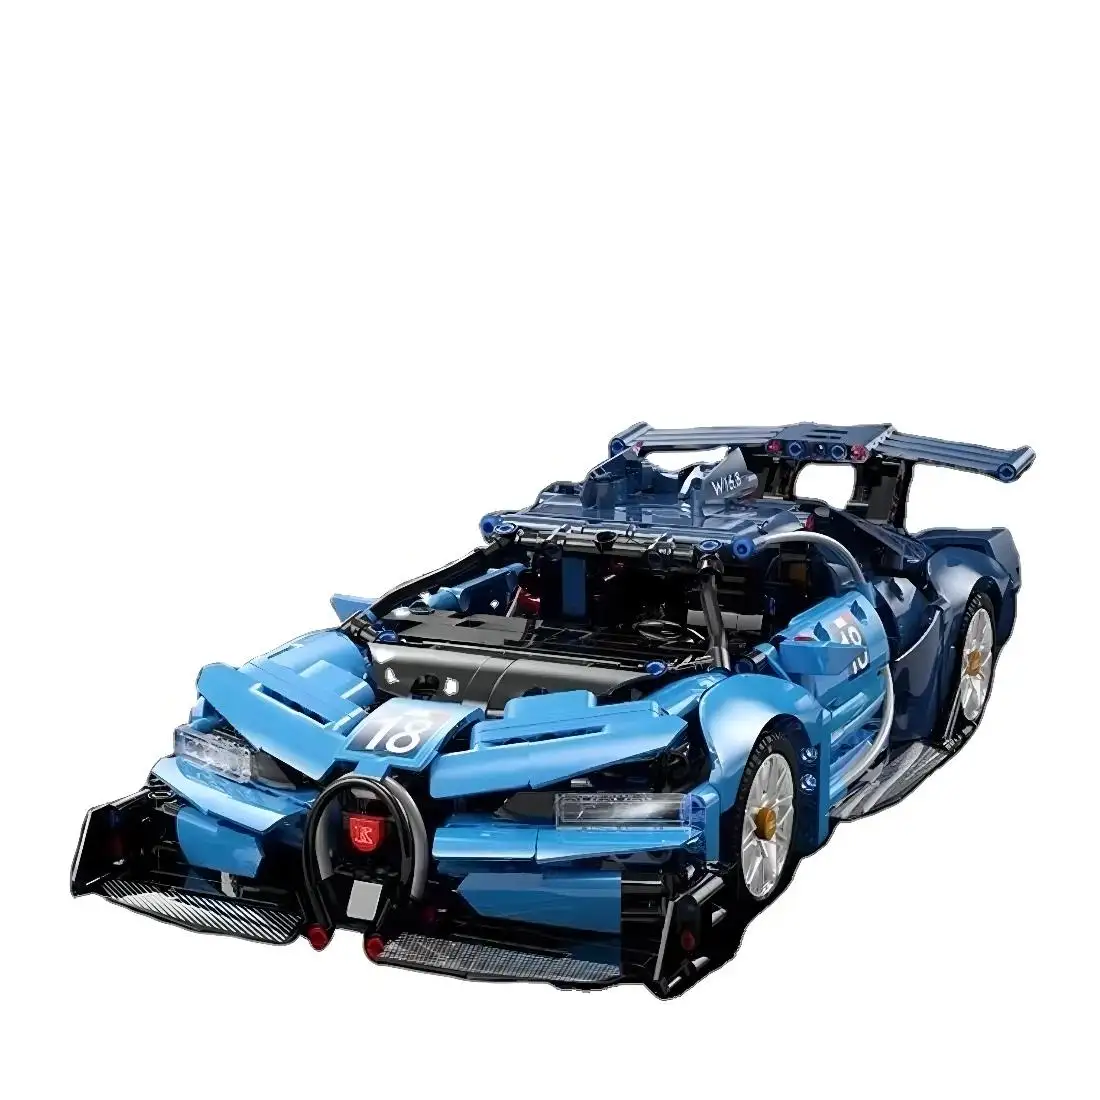 New Arrival Toys For Boy 1:14 Rc Racing Building Blocks Set Bugatti Model block ABS Plastic Compatible Technic Legoing Car Gifts